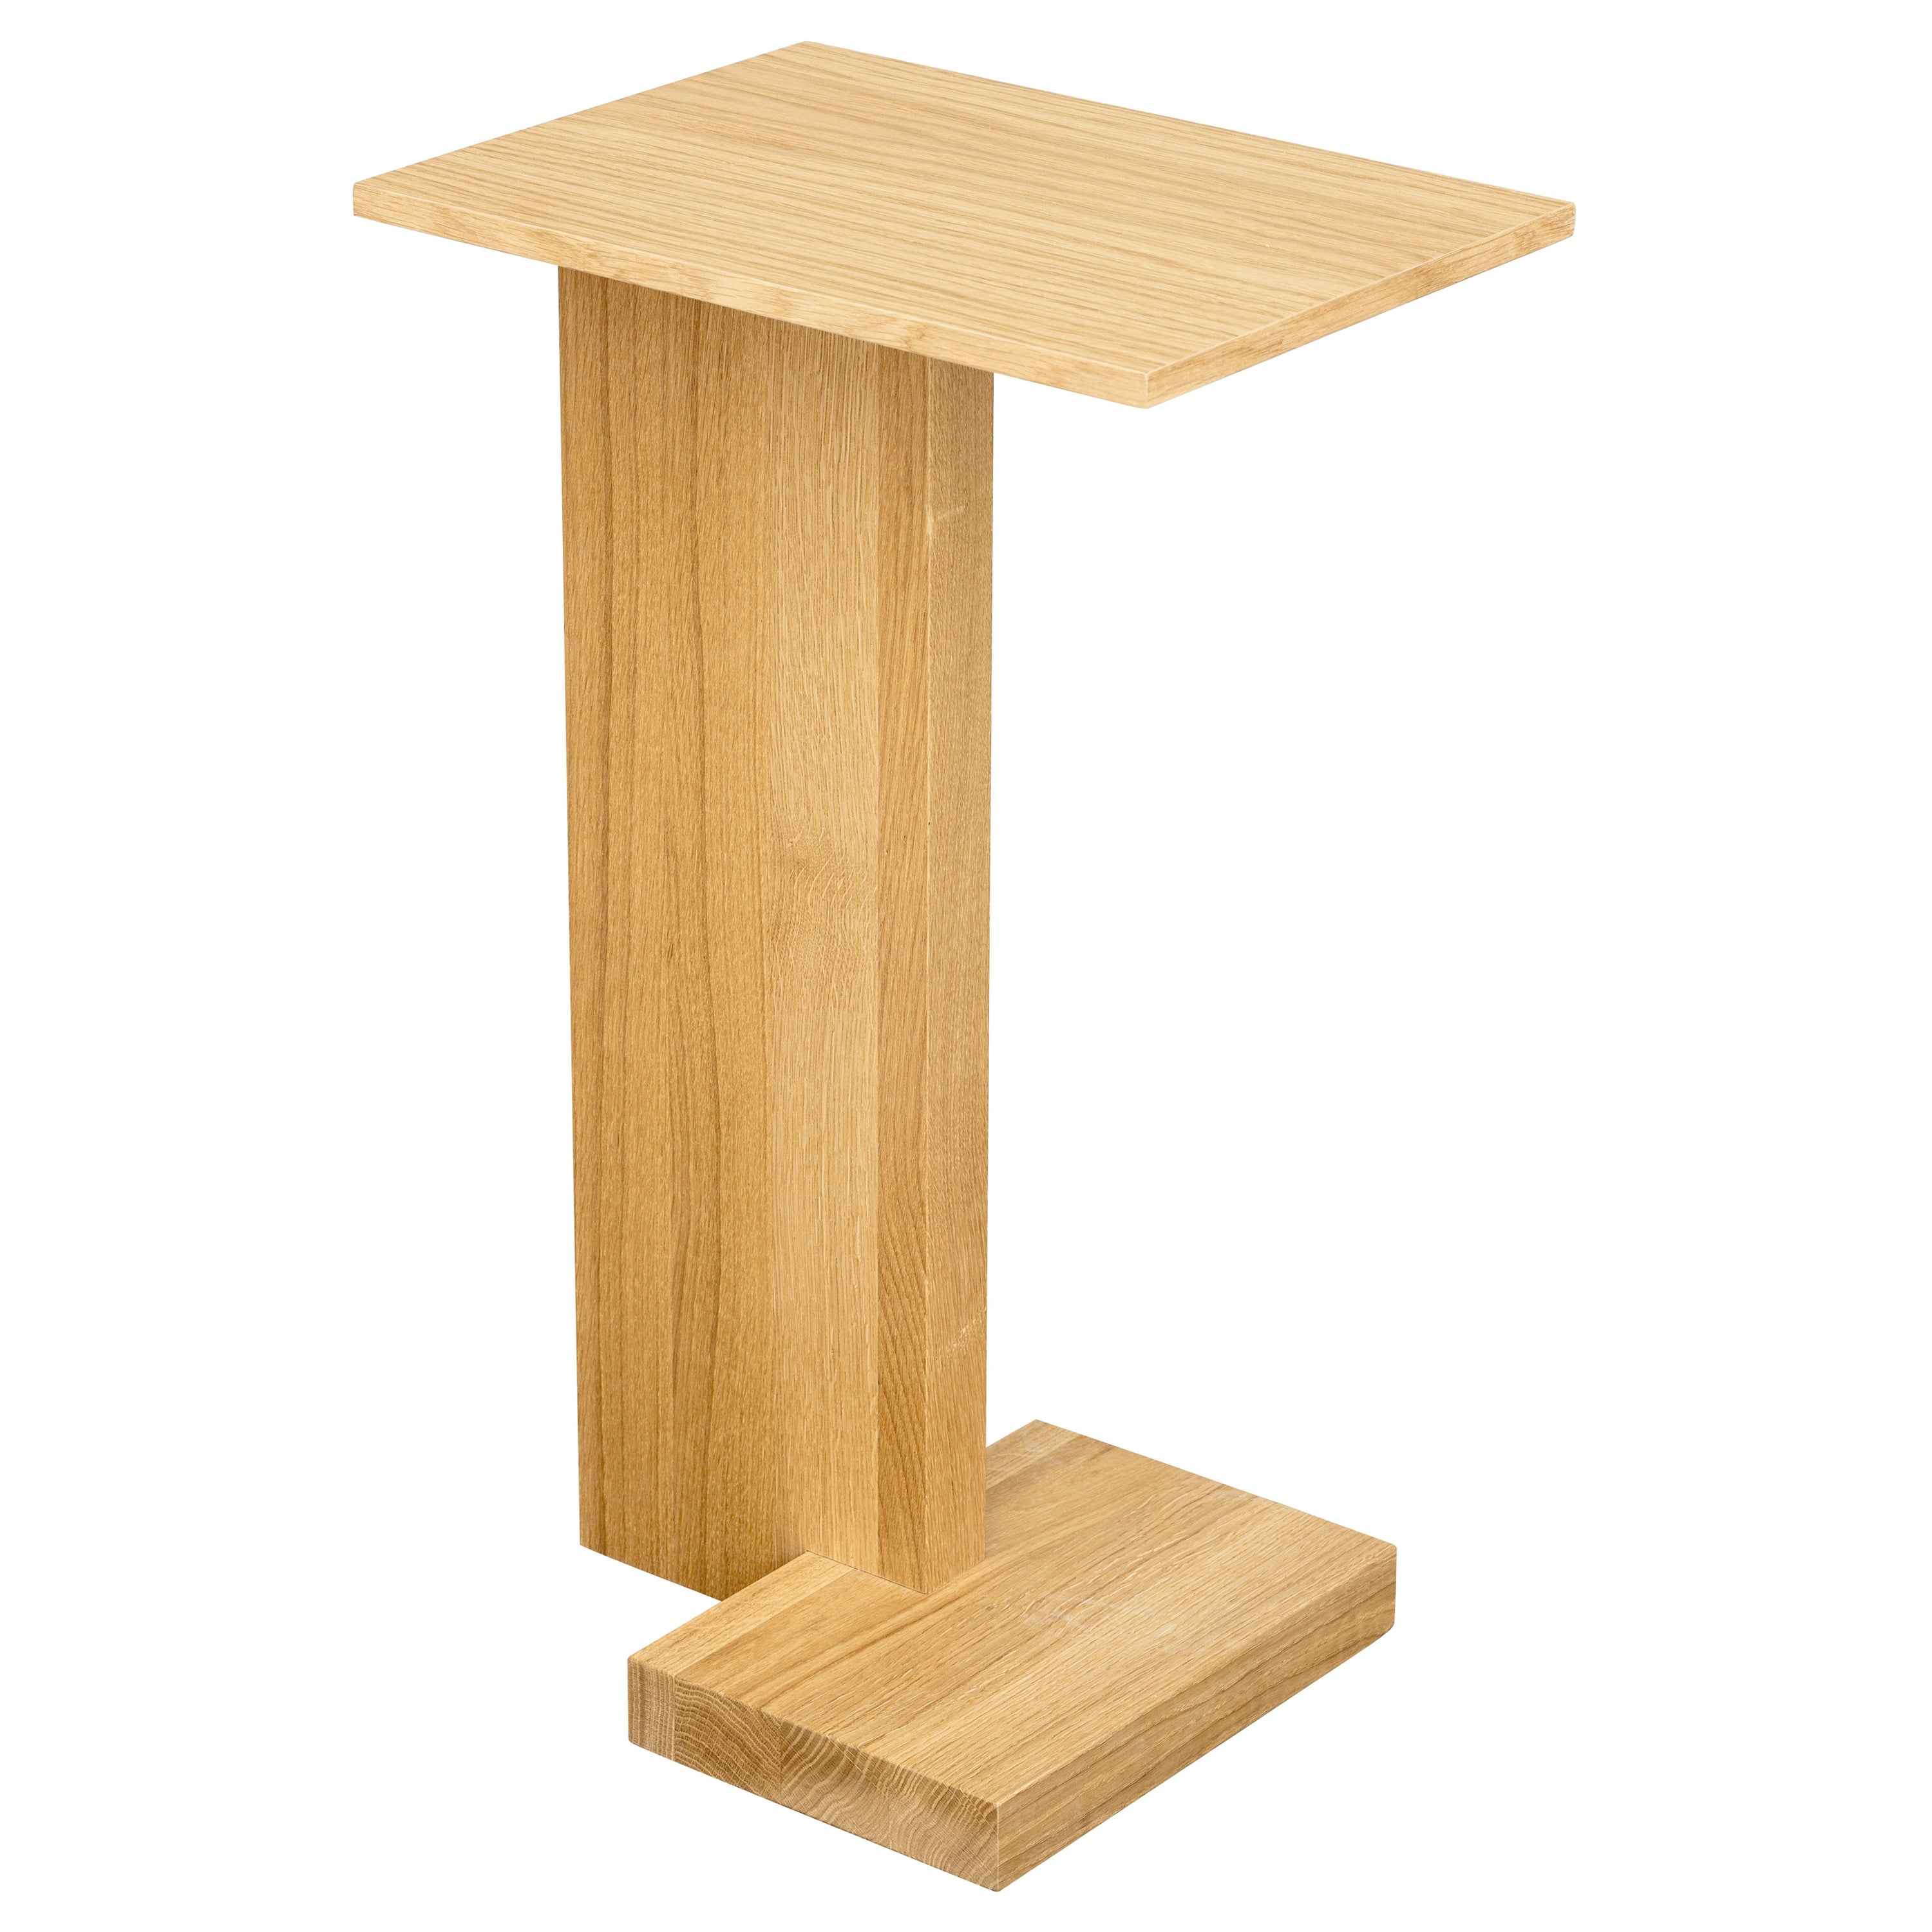 Supersolid Object 5, Wooden High Table by Fogia, Oak For Sale